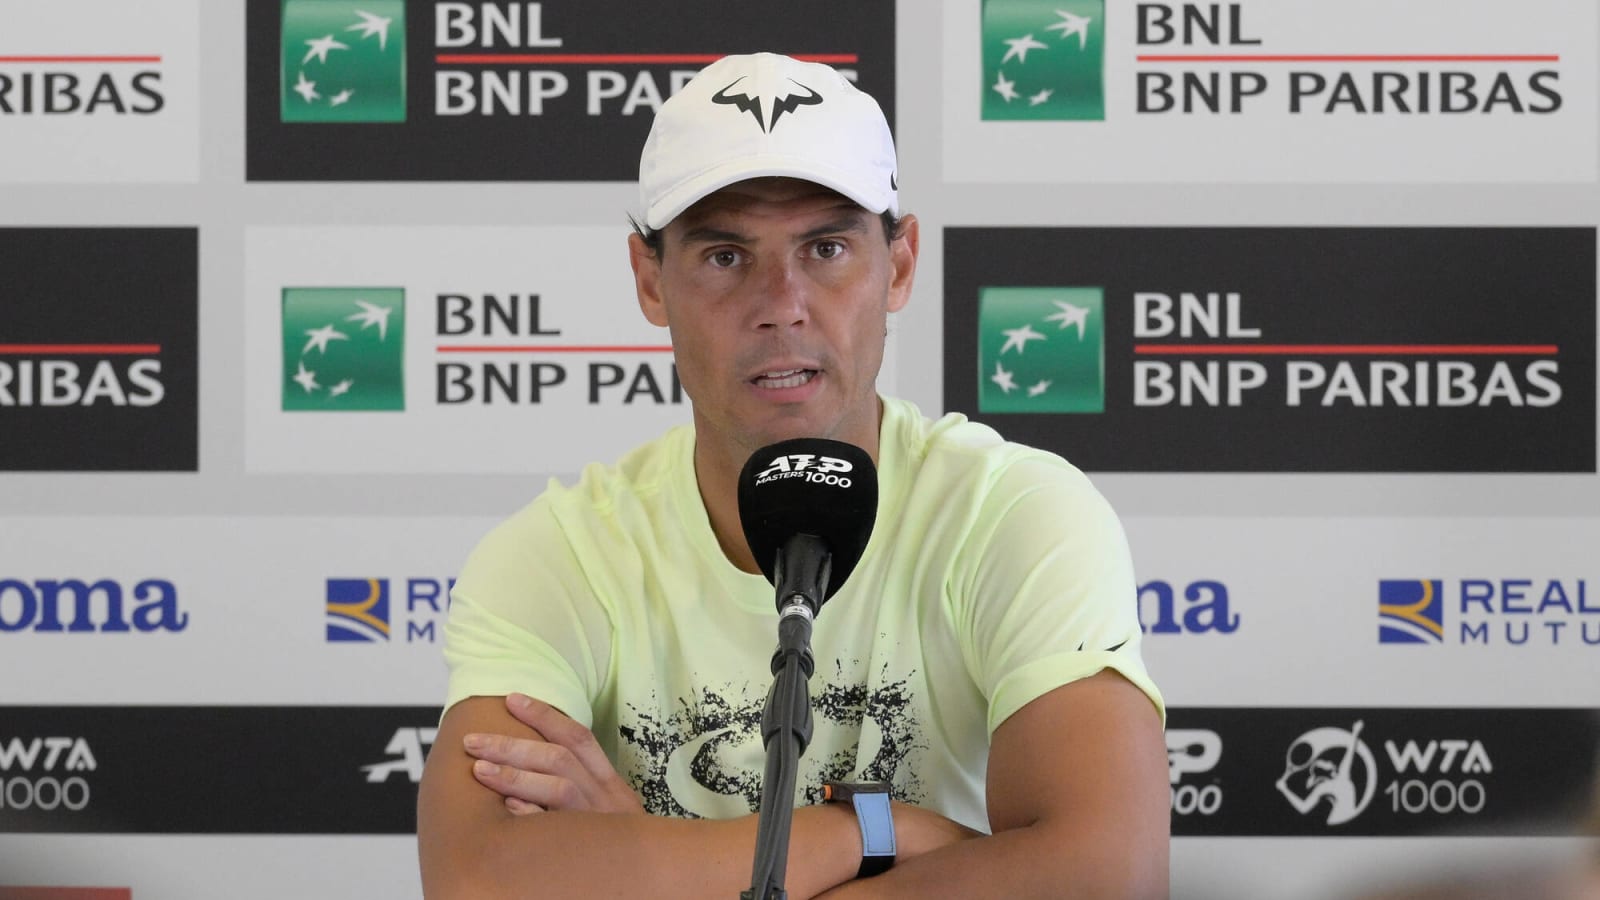 Hubert Hurkacz declares Rafael Nadal 'is bigger than the sport' after defeating him in Rome